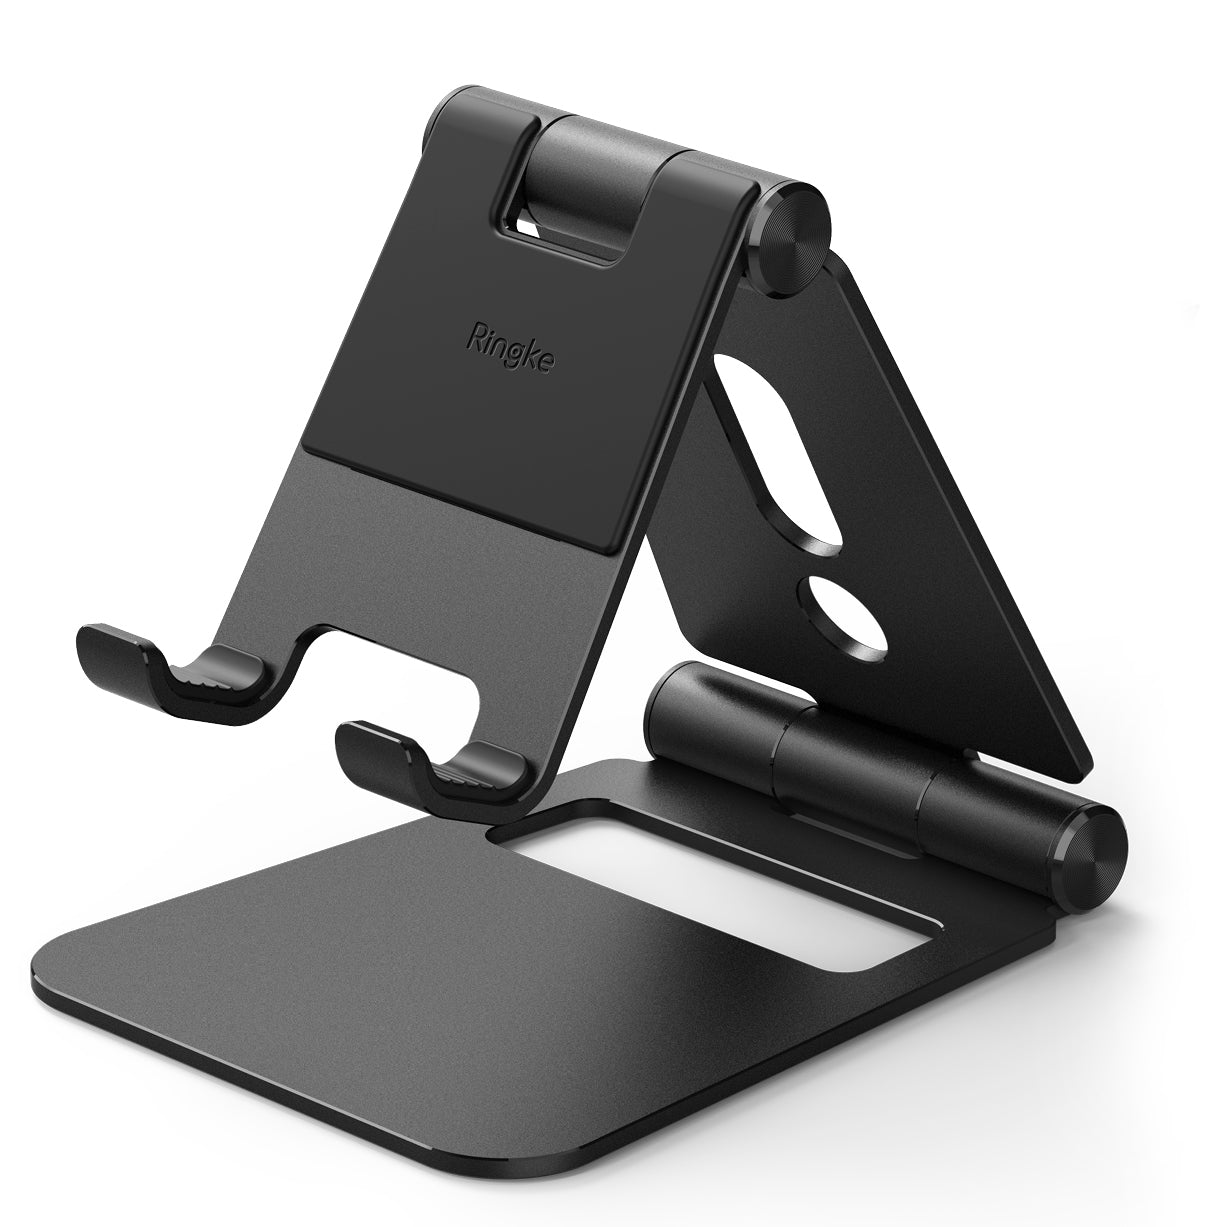 Super Folding Stand - Ringke Official Store